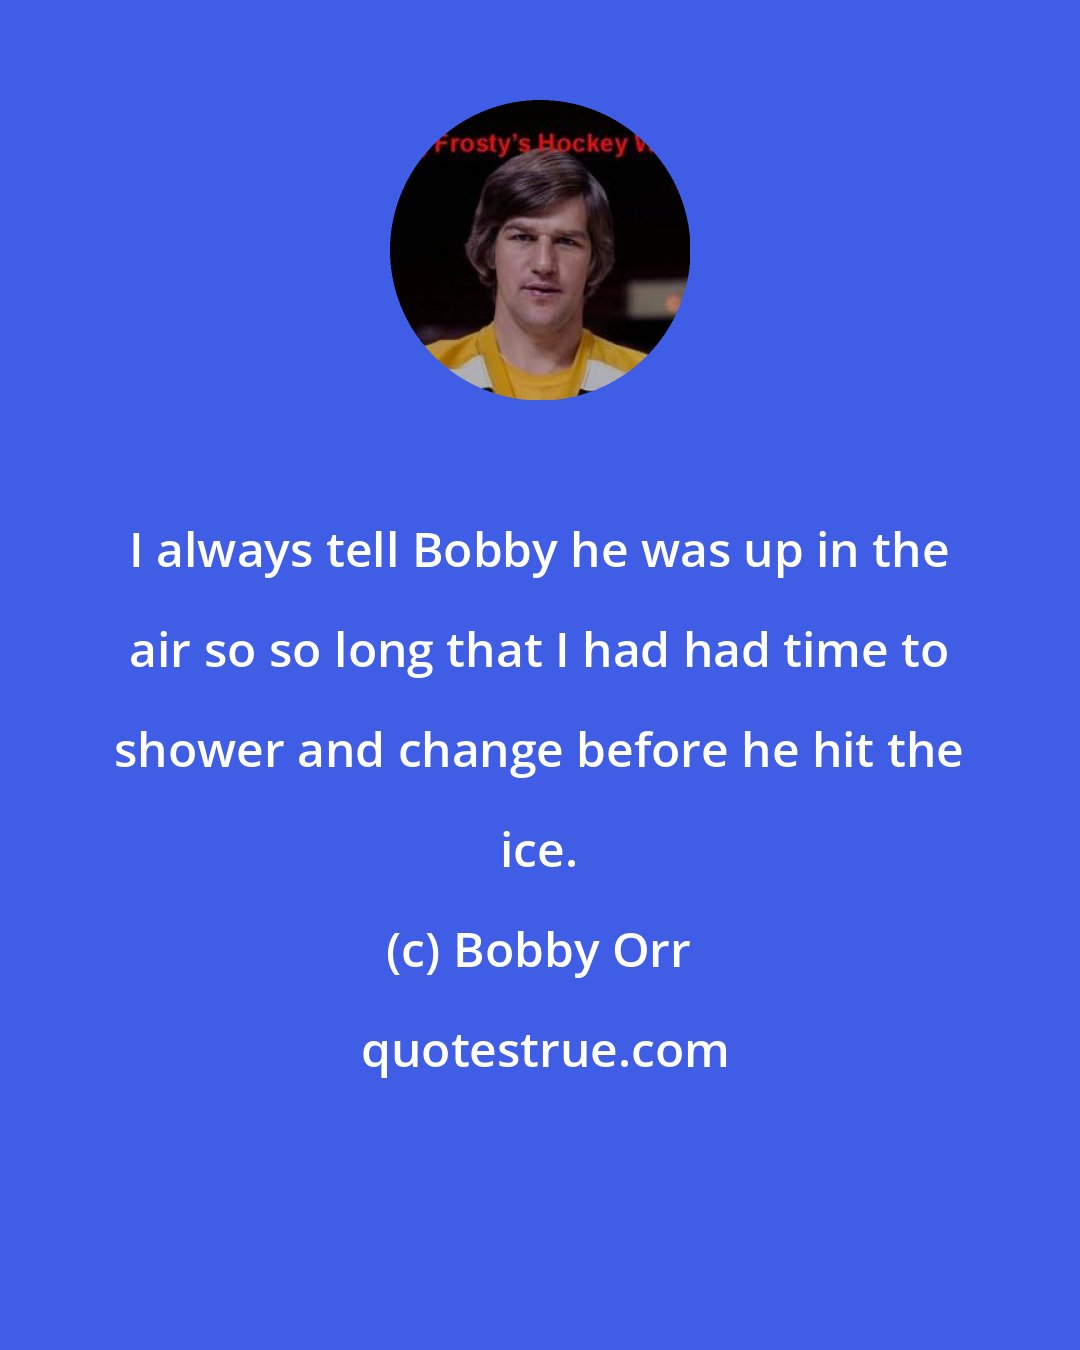 Bobby Orr: I always tell Bobby he was up in the air so so long that I had had time to shower and change before he hit the ice.